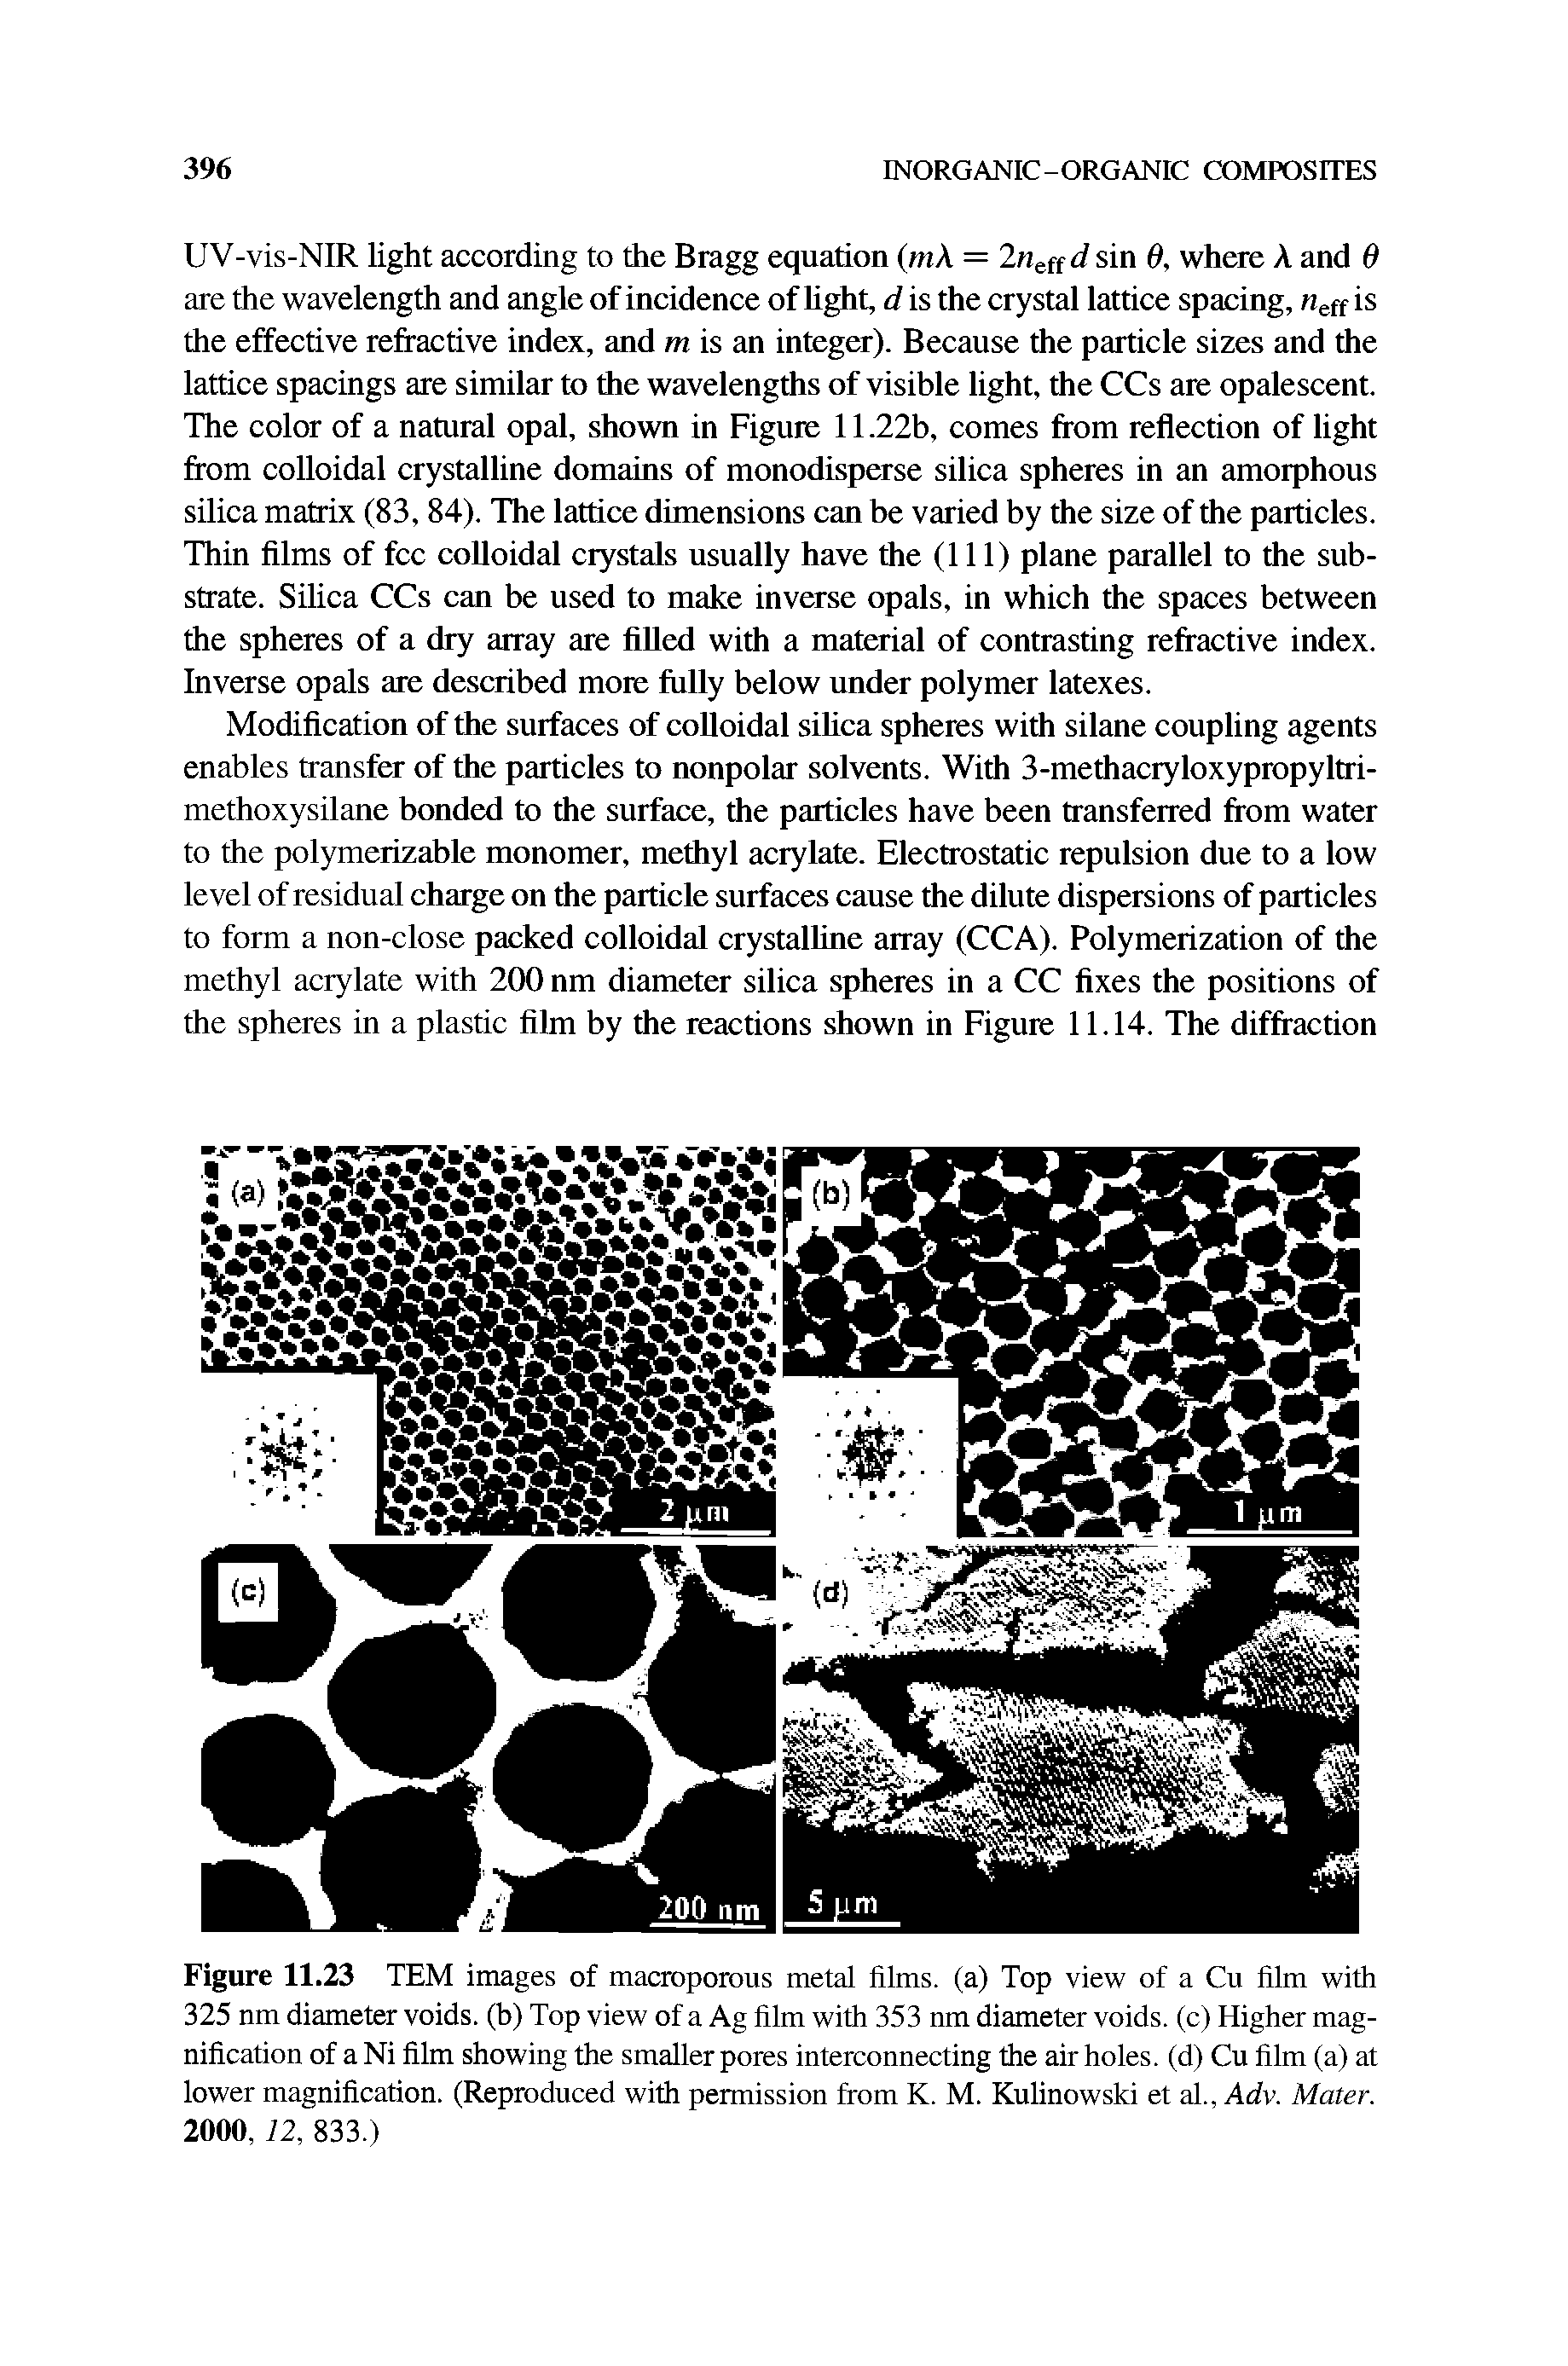 Figure 11.23 TEM images of macroporous metal films, (a) Top view of a Cu film with 325 nm diameter voids, (b) Top view of a Ag film with 353 nm diameter voids, (c) Higher magnification of a Ni film showing the smaller pores interconnecting the air holes, (d) Cu film (a) at lower magnification. (Reproduced with permission from K. M. Kulinowski et al., Adv. Mater. 2000,12, 833.)...